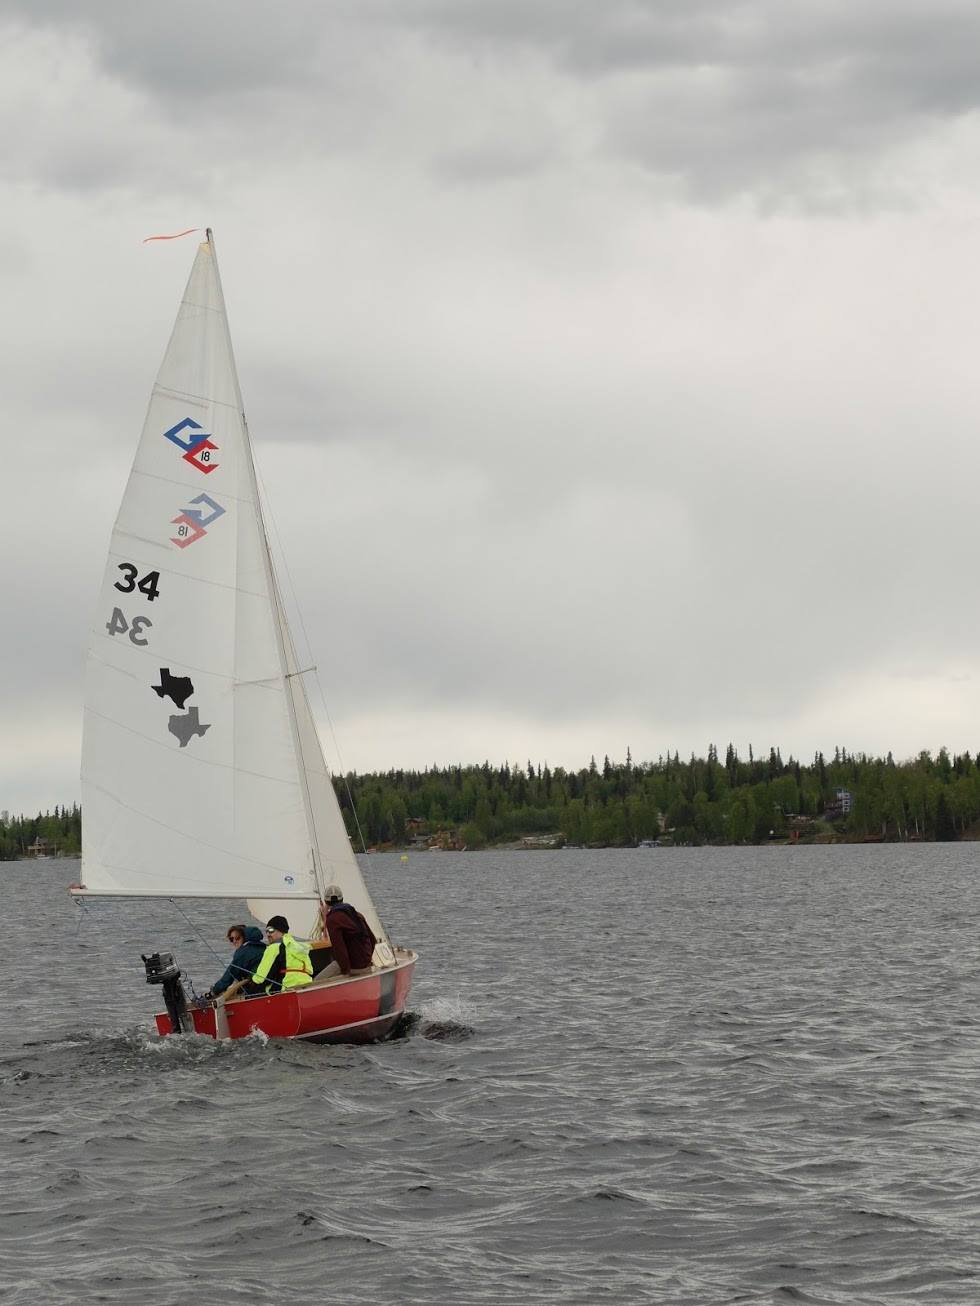 Plan Ahead Now for Summer Sailstice 2019